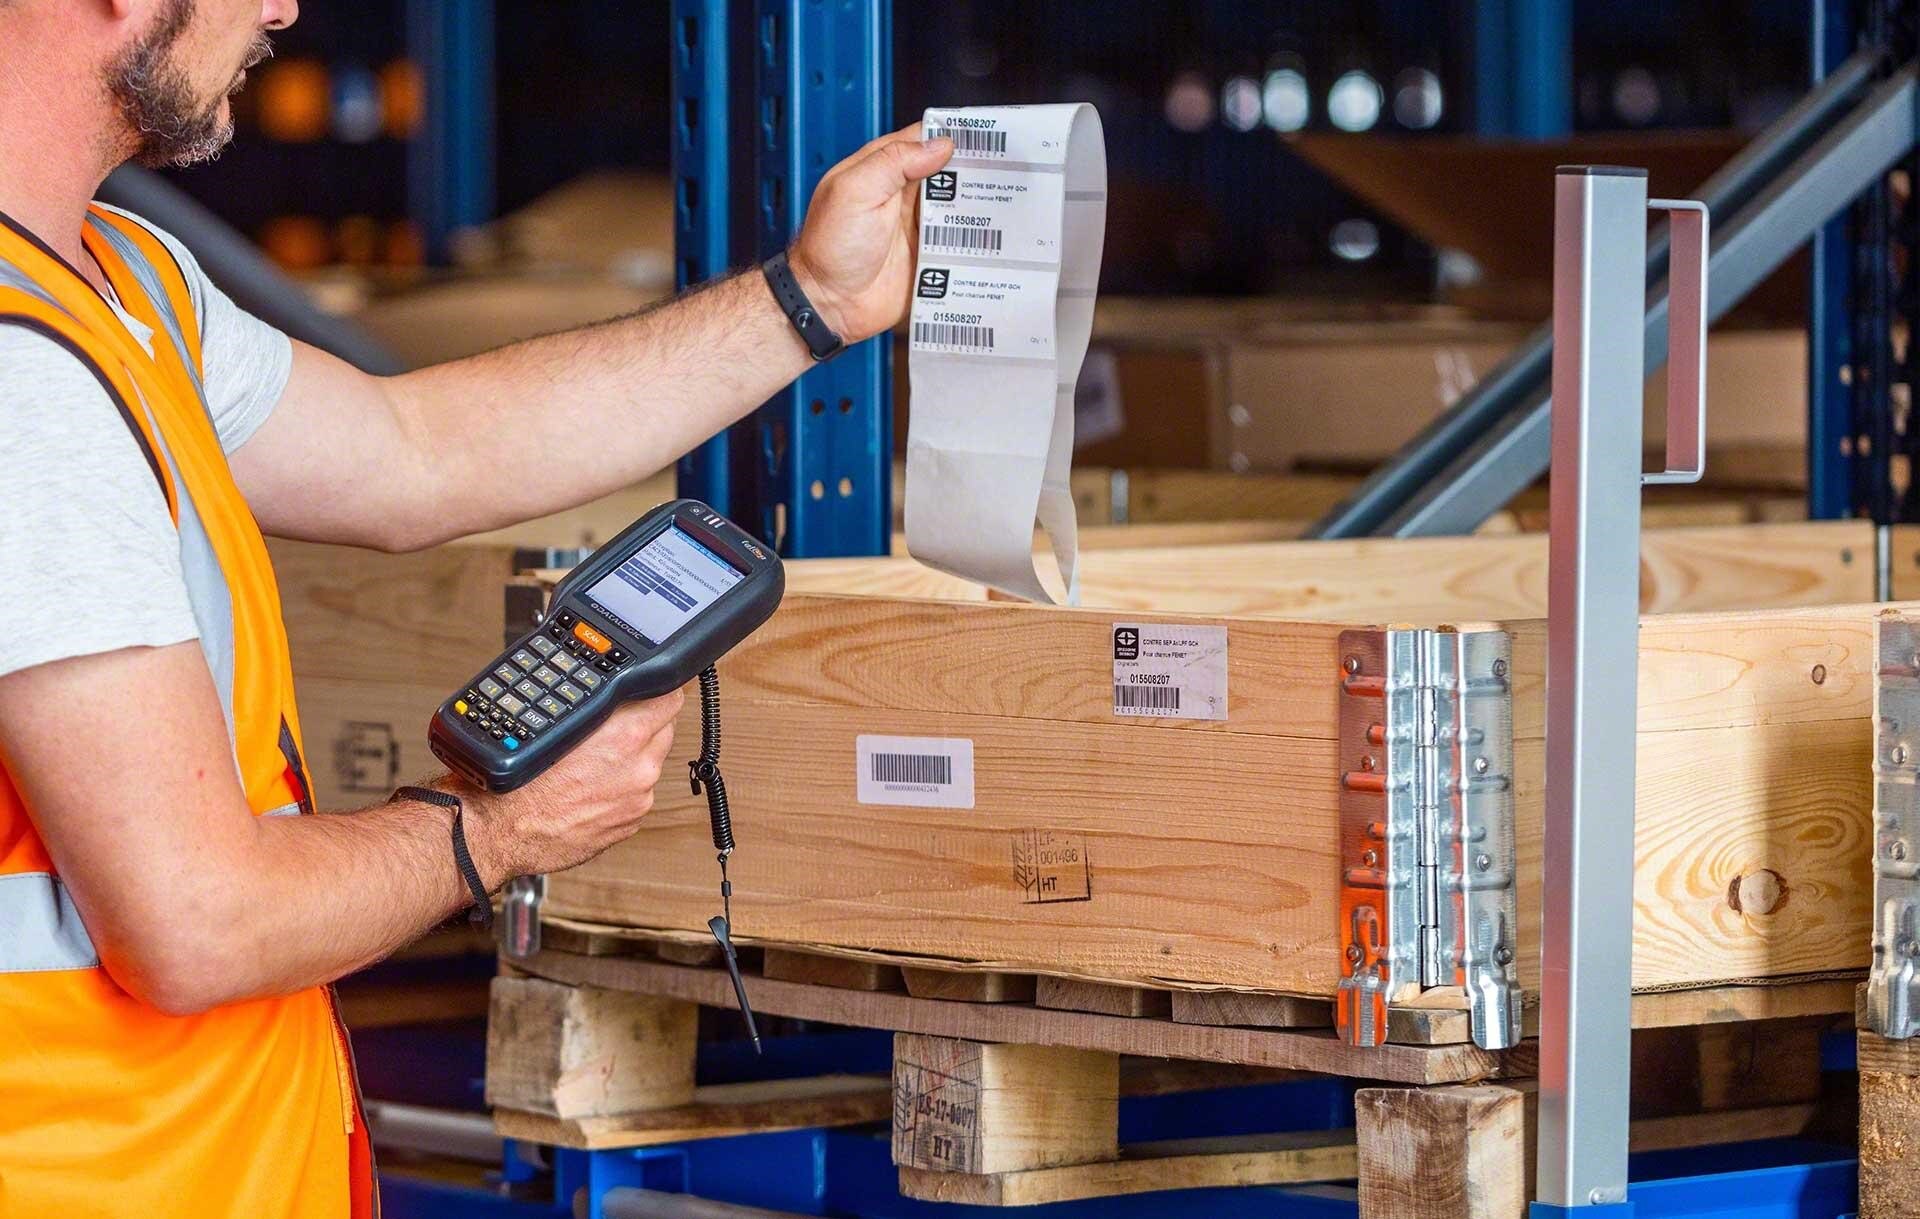 What is a SKU? Meaning and in-warehouse usage